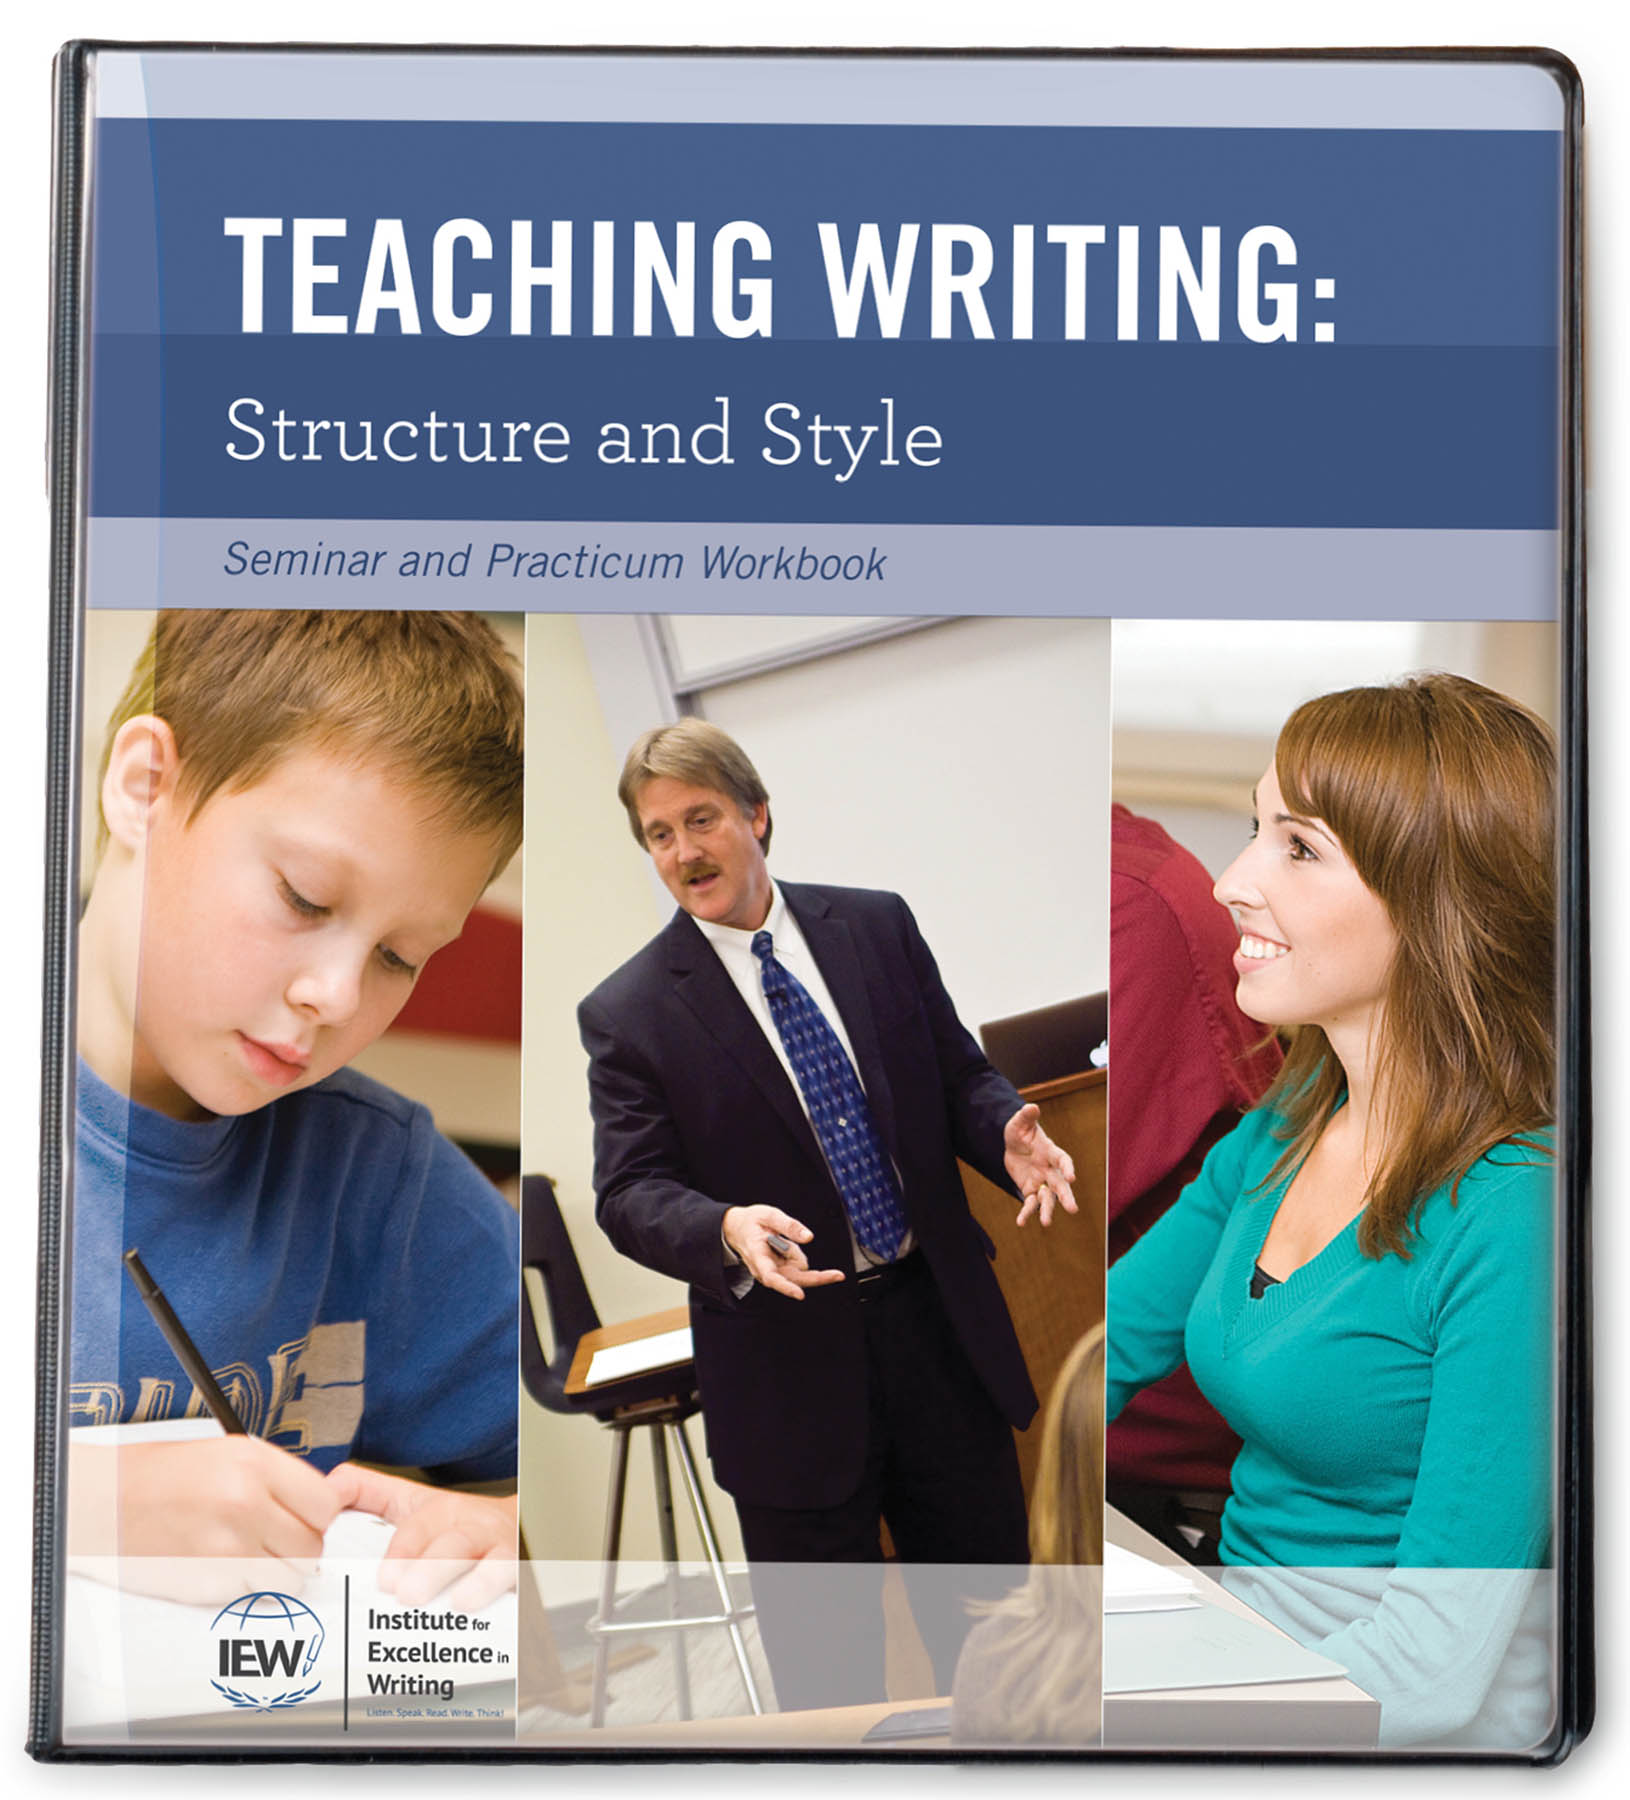 Teaching Writing: Structure and Style, Second Edition [Seminar Workbook] [CLEARANCE]